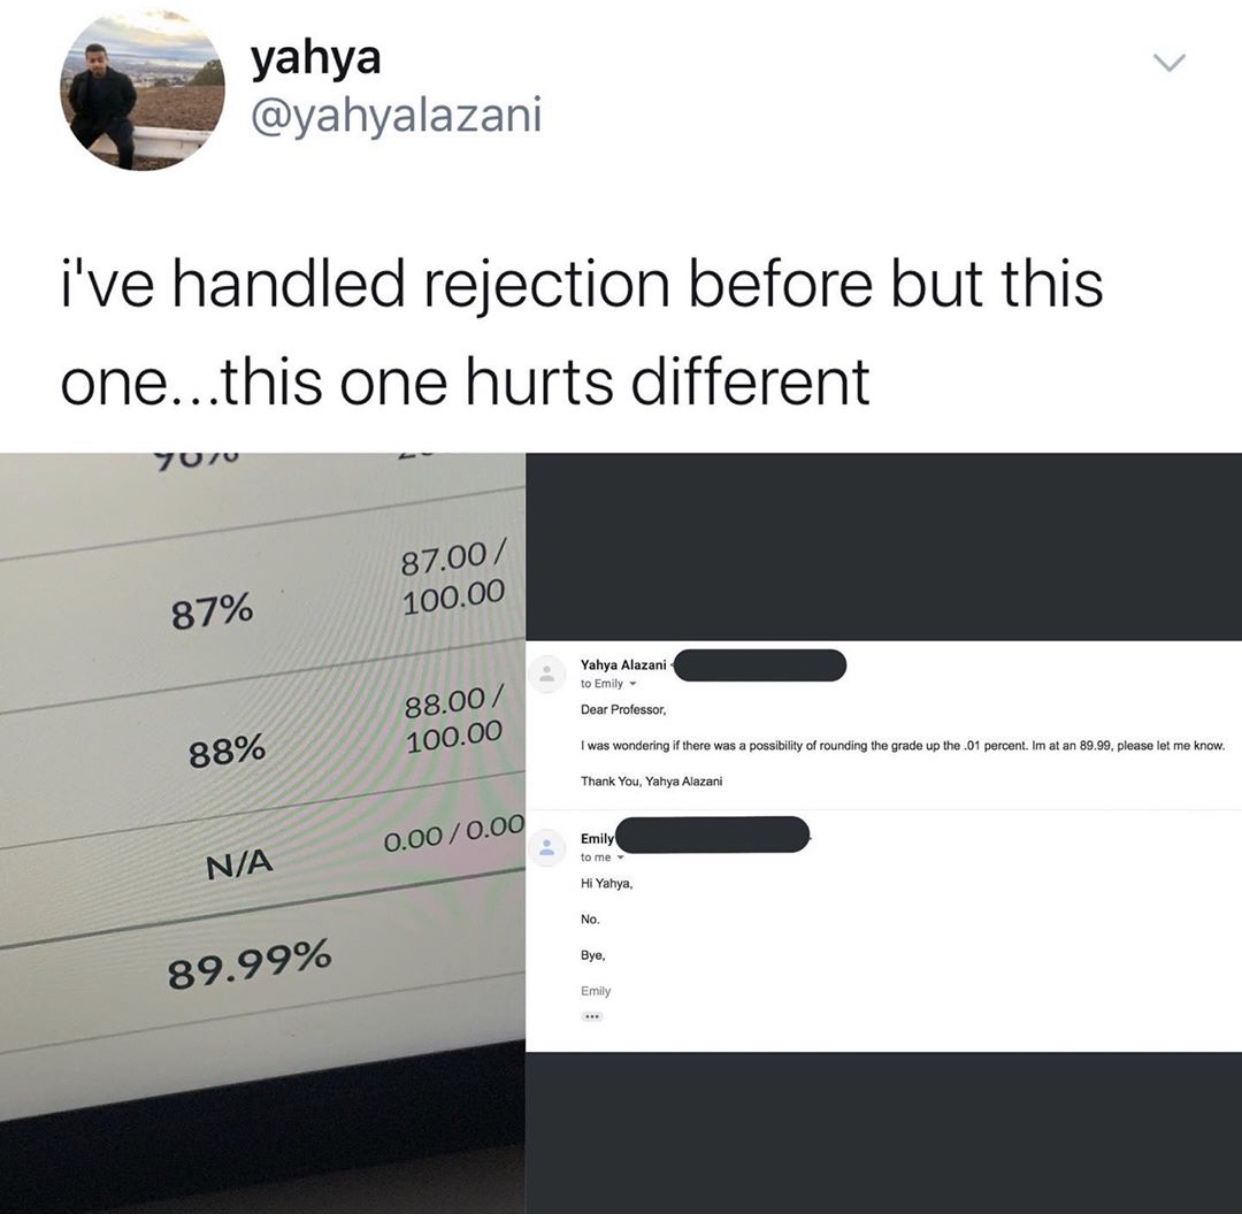 material - yahya i've handled rejection before but this one...this one hurts different yur 87.00 100.00 87% Yahya Alazani to Emily Dear Professor 88.00 100.00 88% I was wondering if there was a possibility of rounding the grade up the .01 percent. Im at a